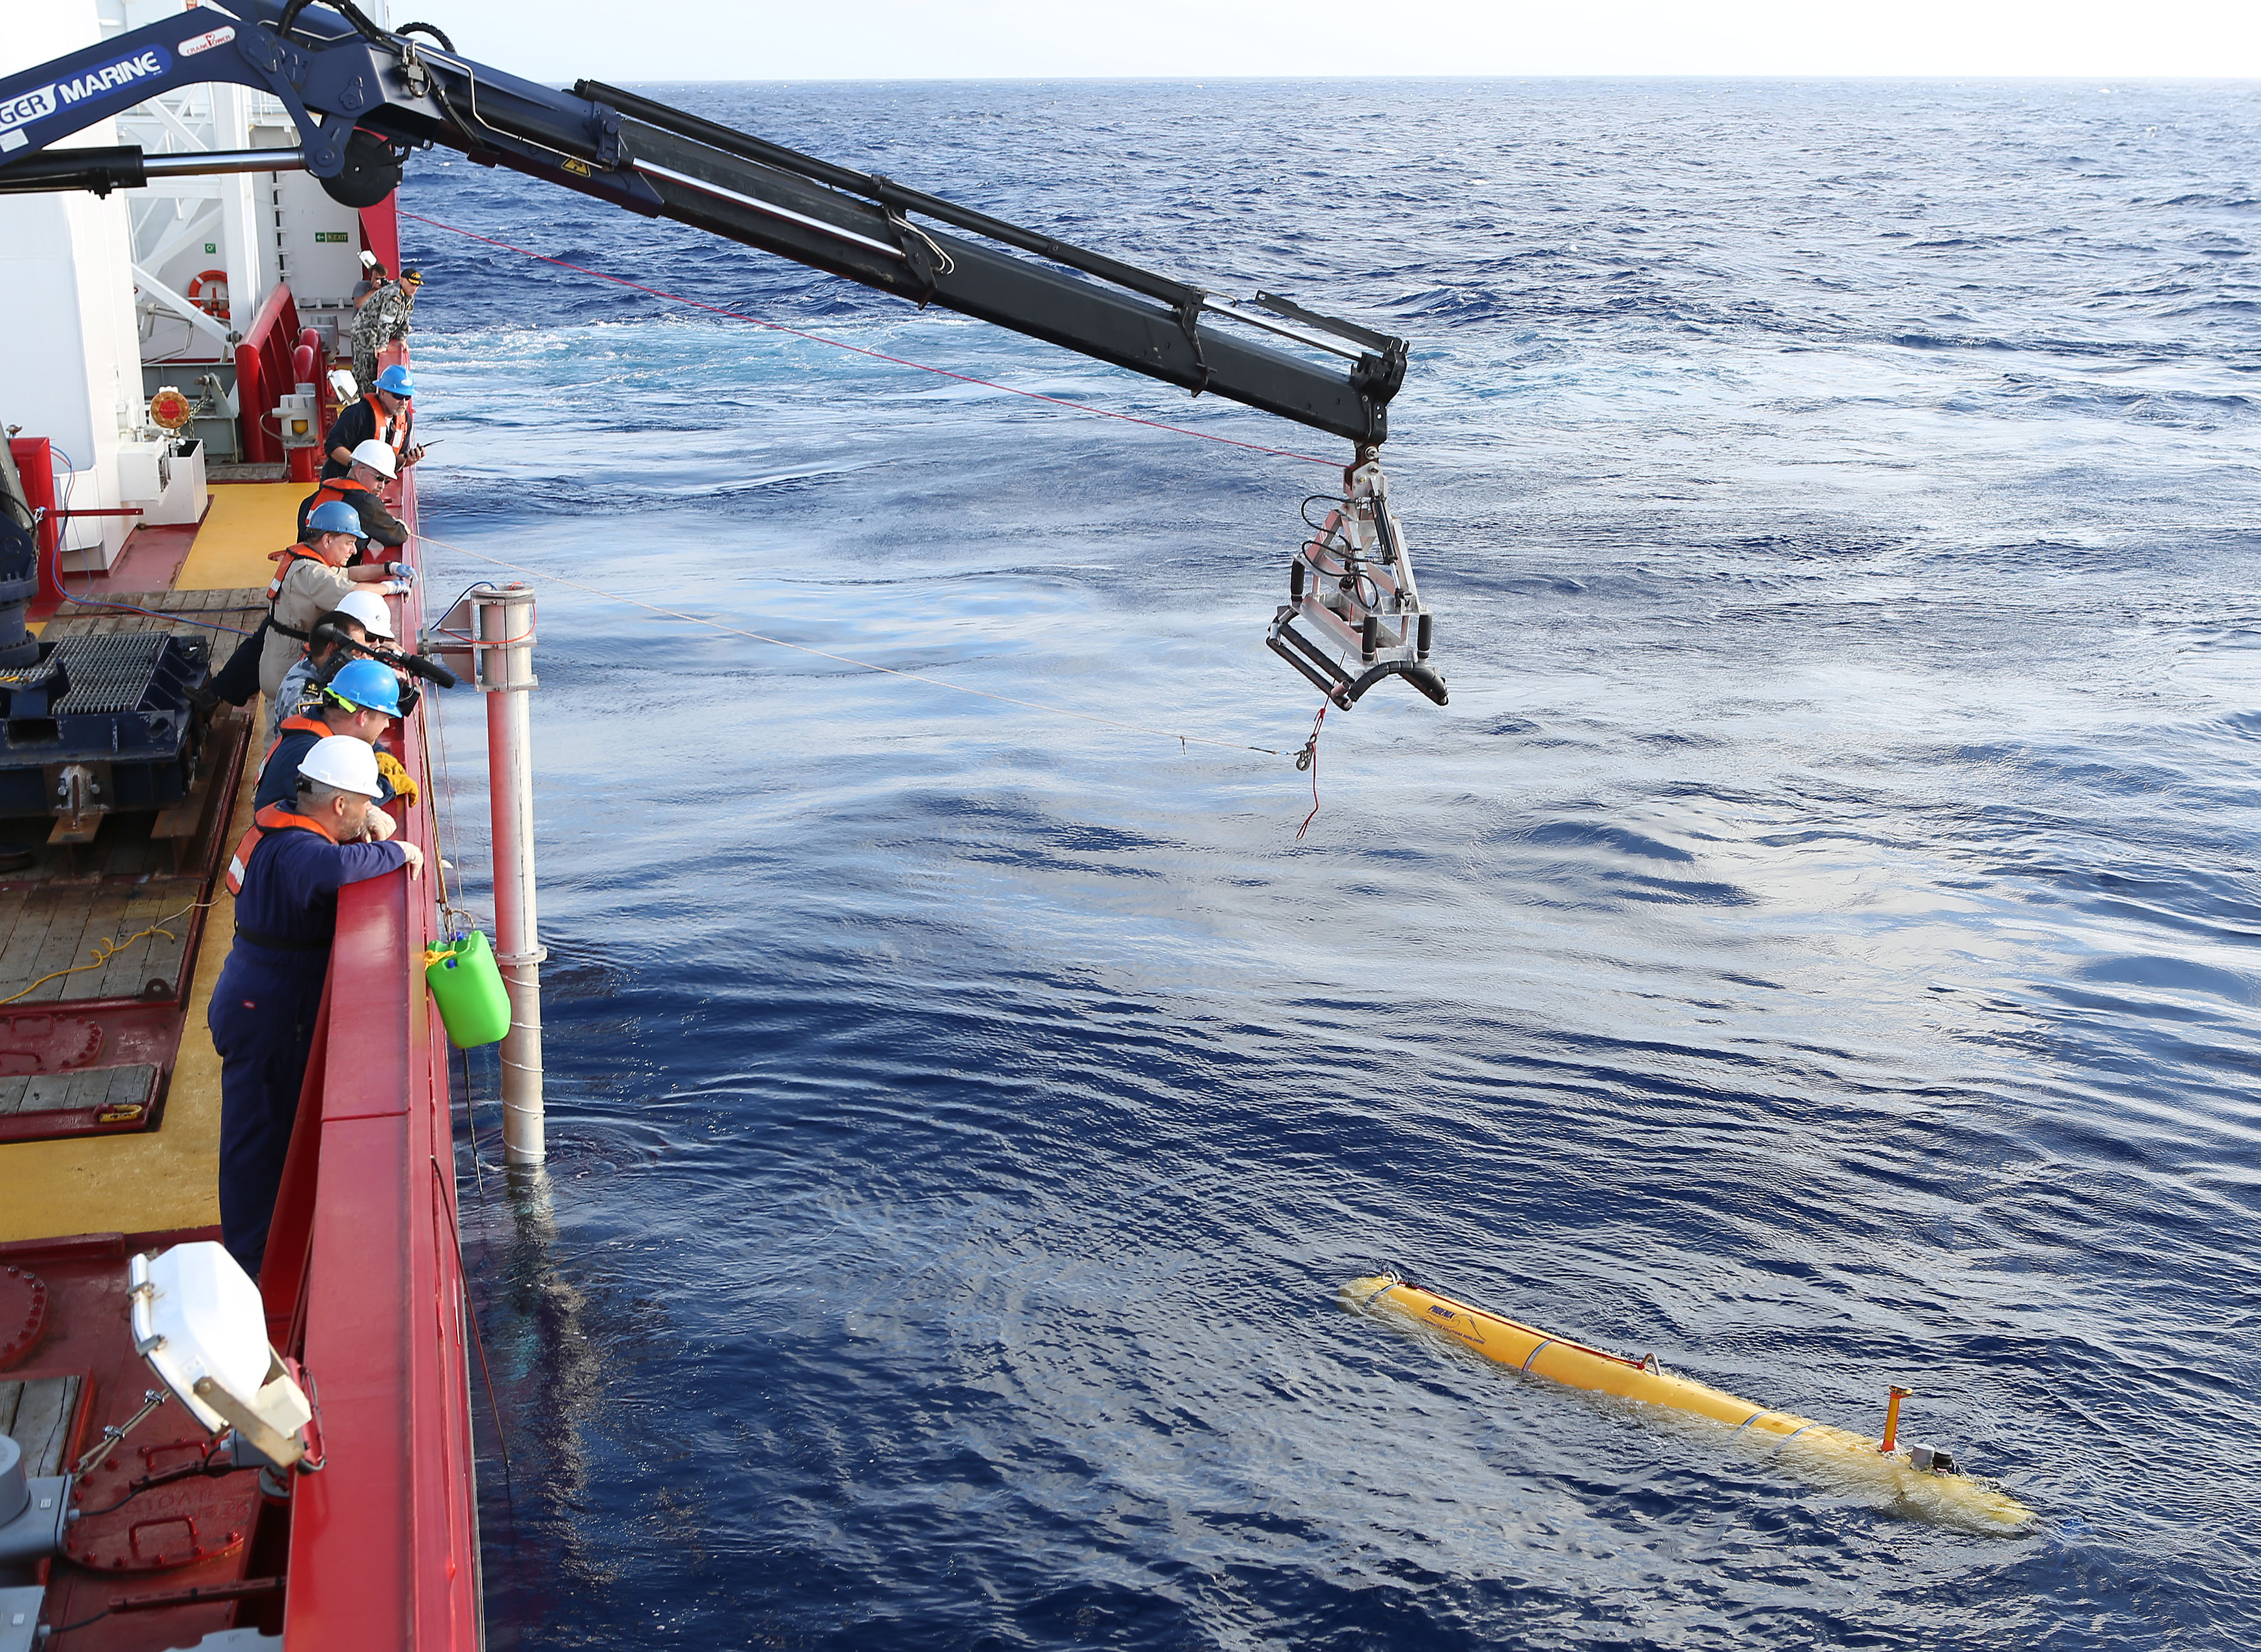 In this handout image provided by Commonwealth of Australia, Department of Defence, Phoenix Autonomous Underwater Vehicle (AUV) Bluefin-21 is craned over the side of Australian Defence Vessel Ocean Shield in the search for missing Malaysia Airlines flight MH 370 on April 14, 2014. (Handout&mdash;Getty Images)